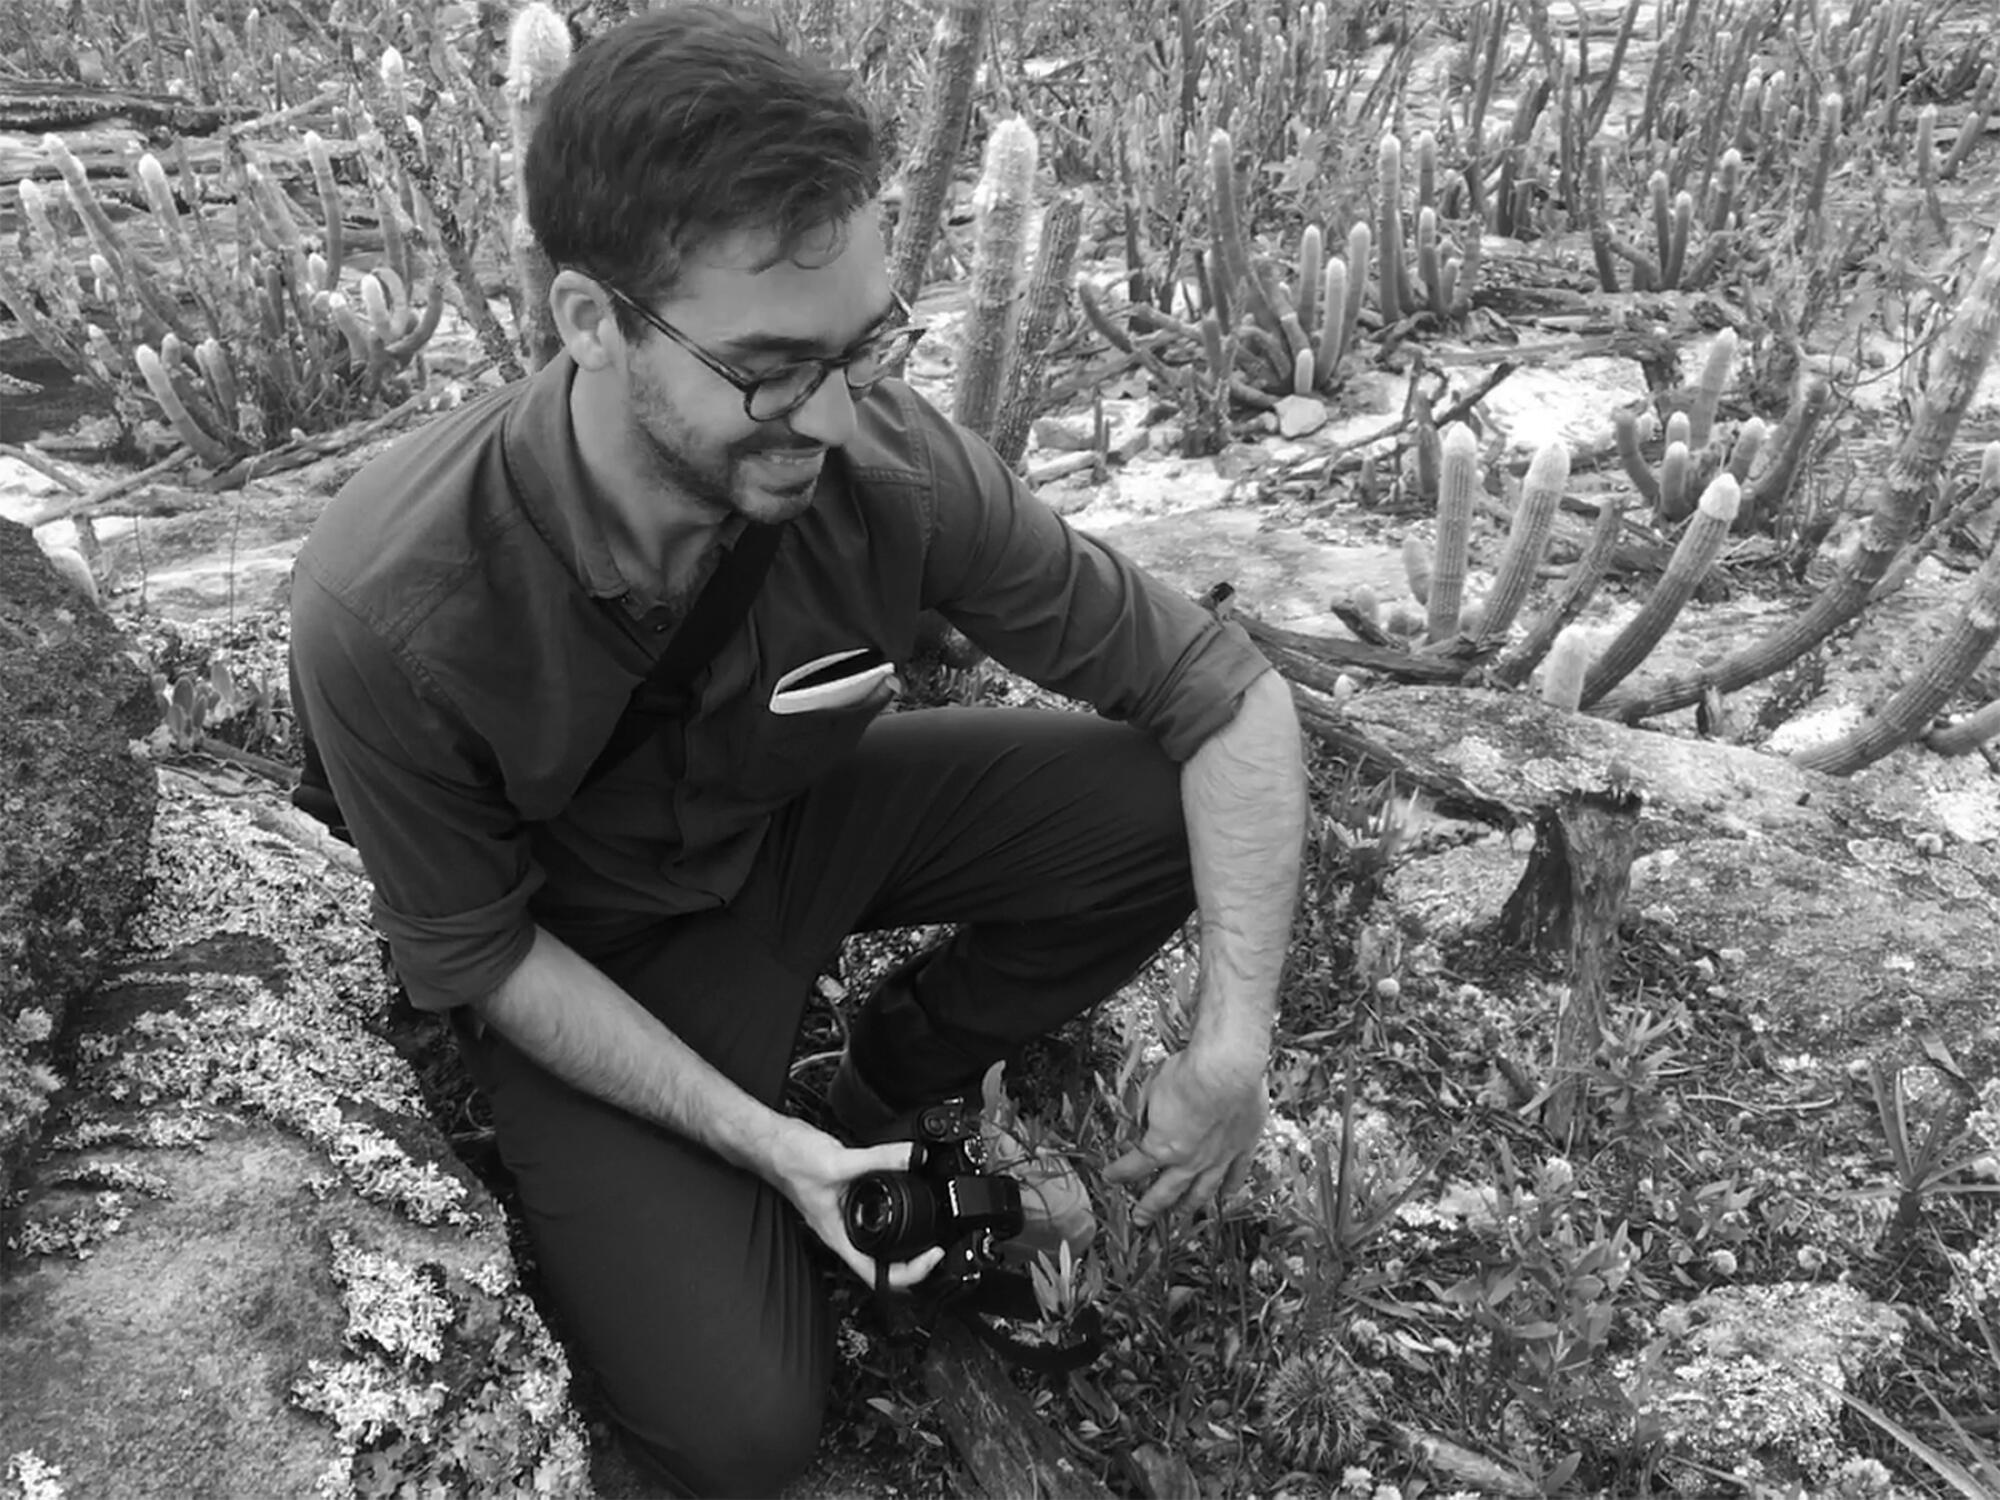 A man with a camera in his hand looking down at a rare, small species of cactus.